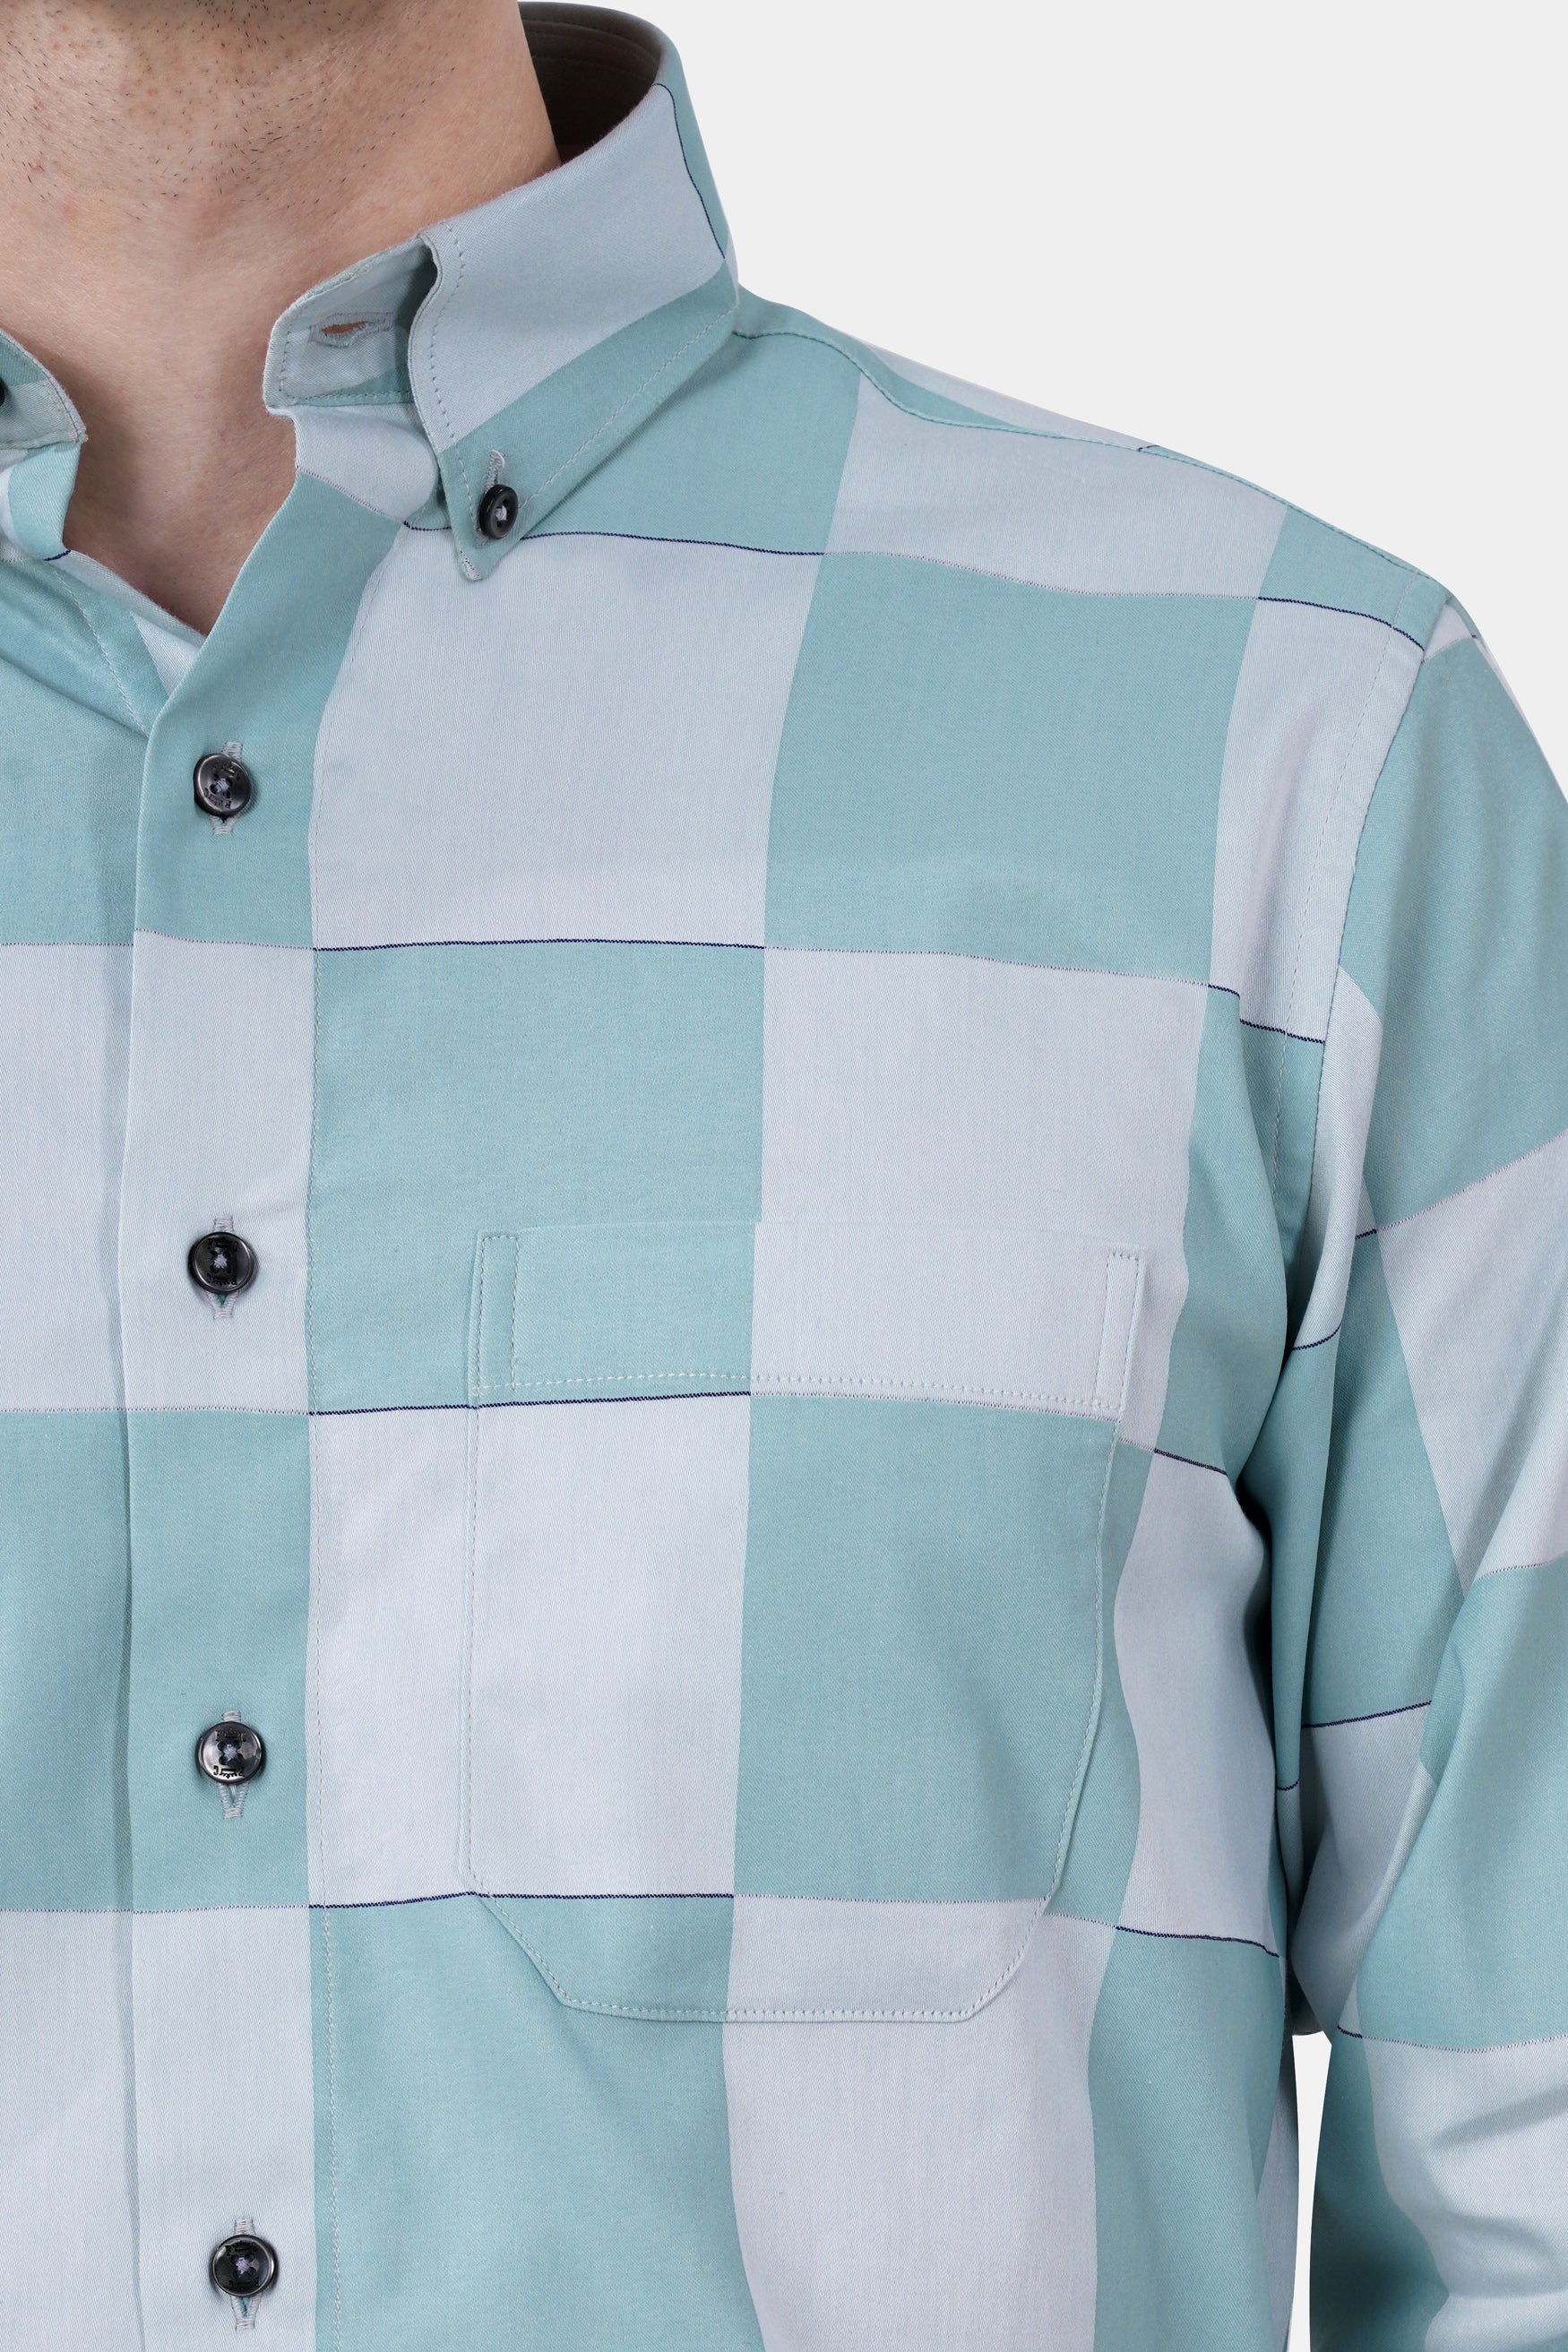 Gull Blue and Ghost Gray Checked Subtle Sheen Super Soft Premium Cotton Shirt